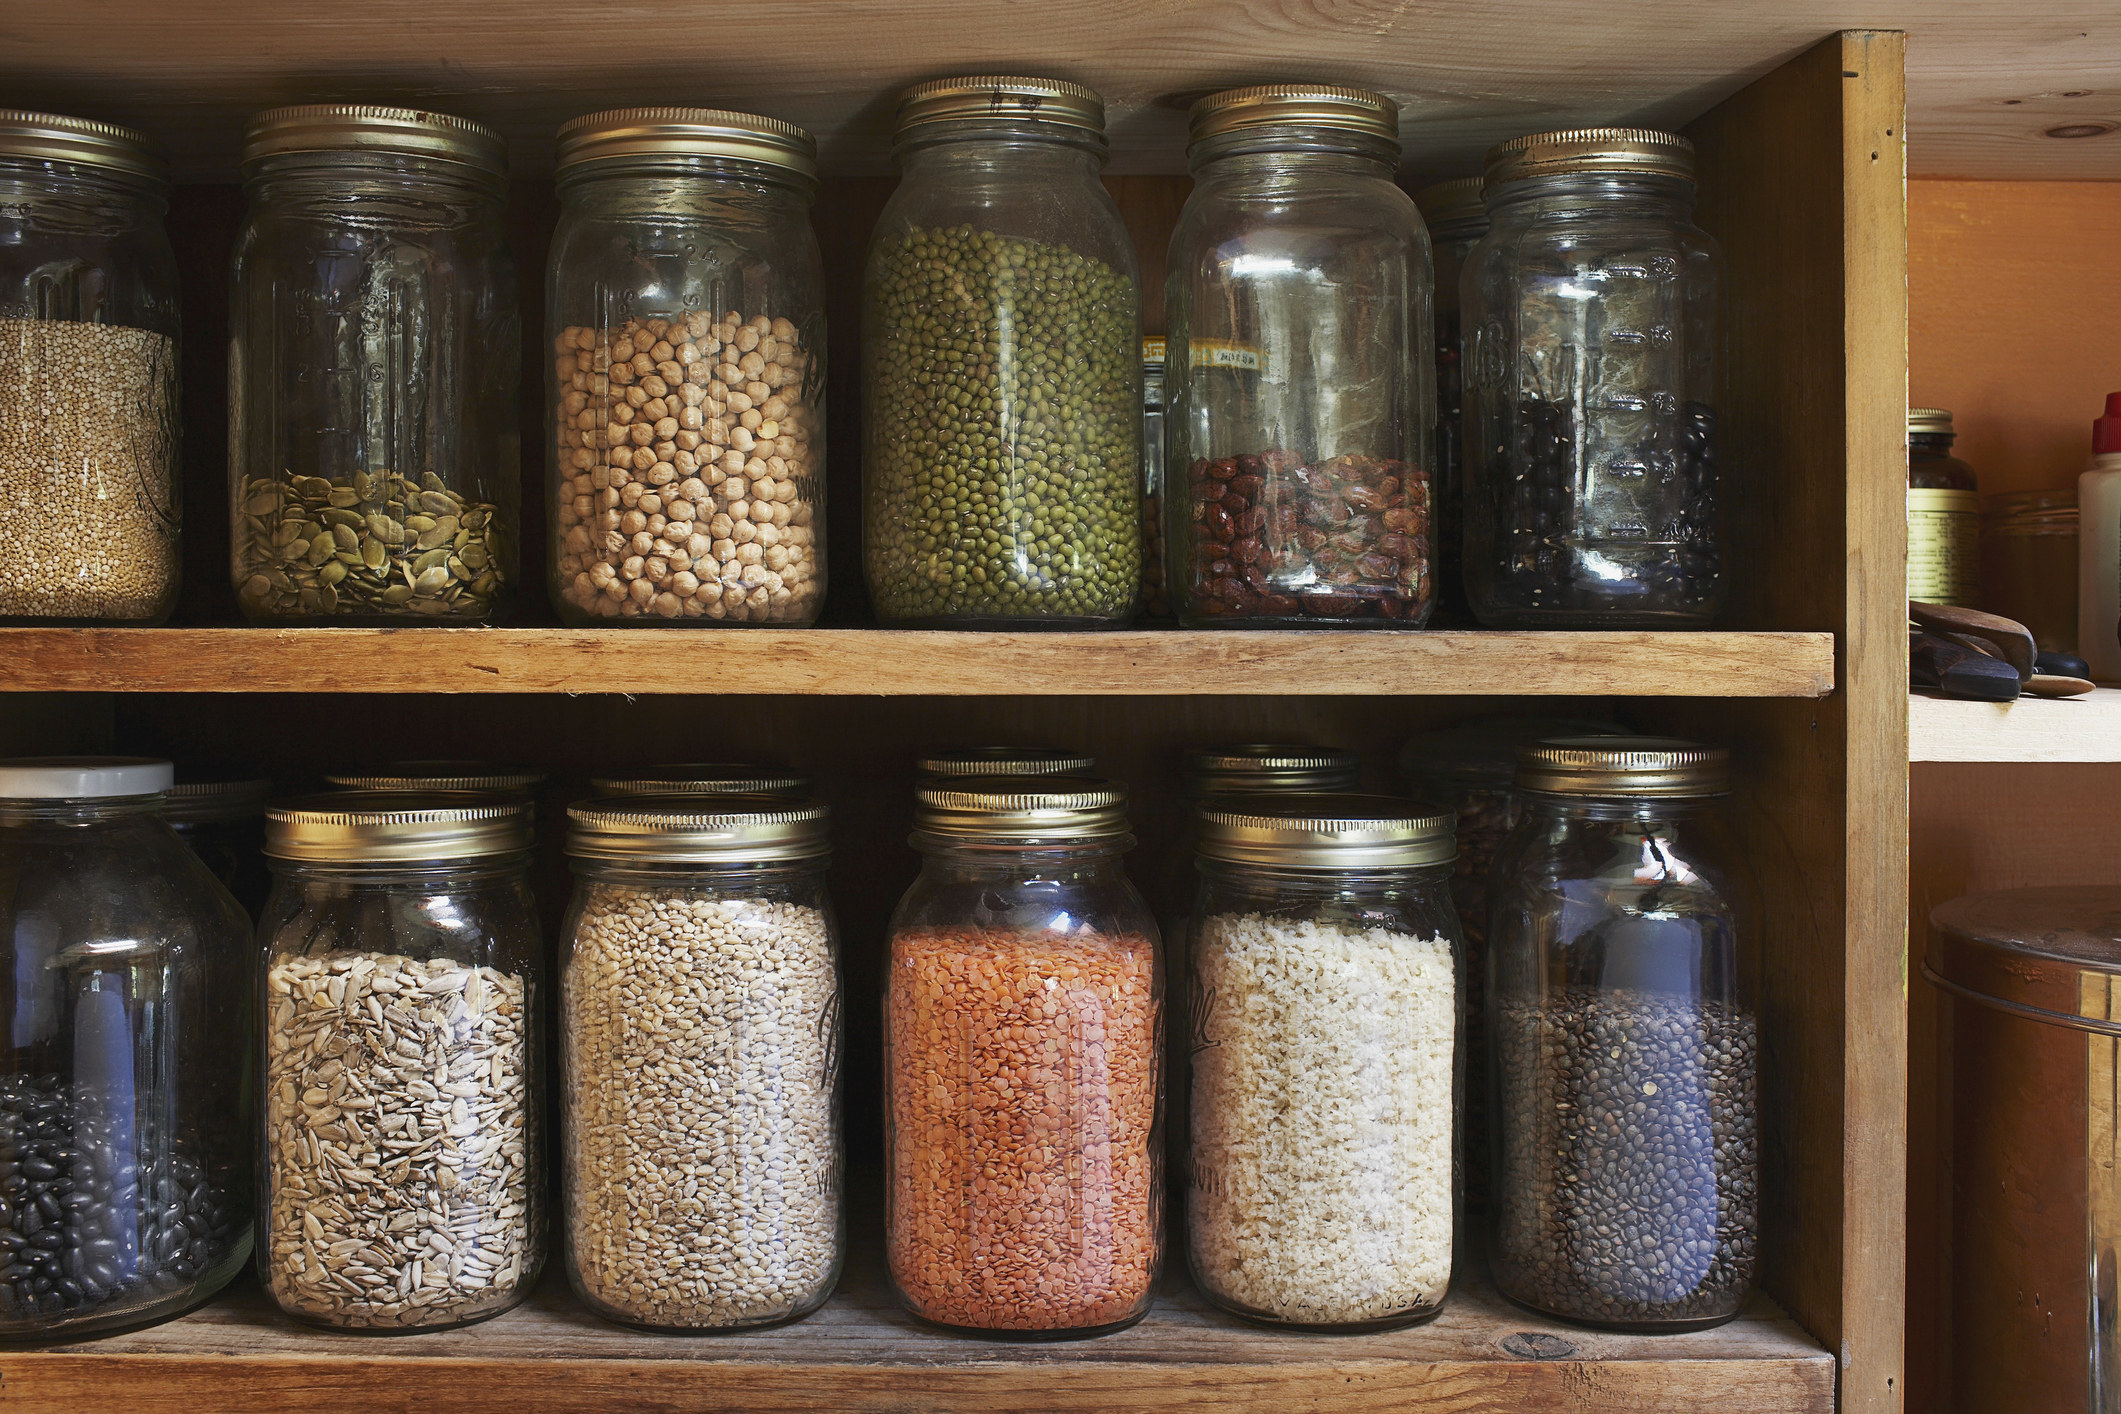 Jars of spices in a cupboard